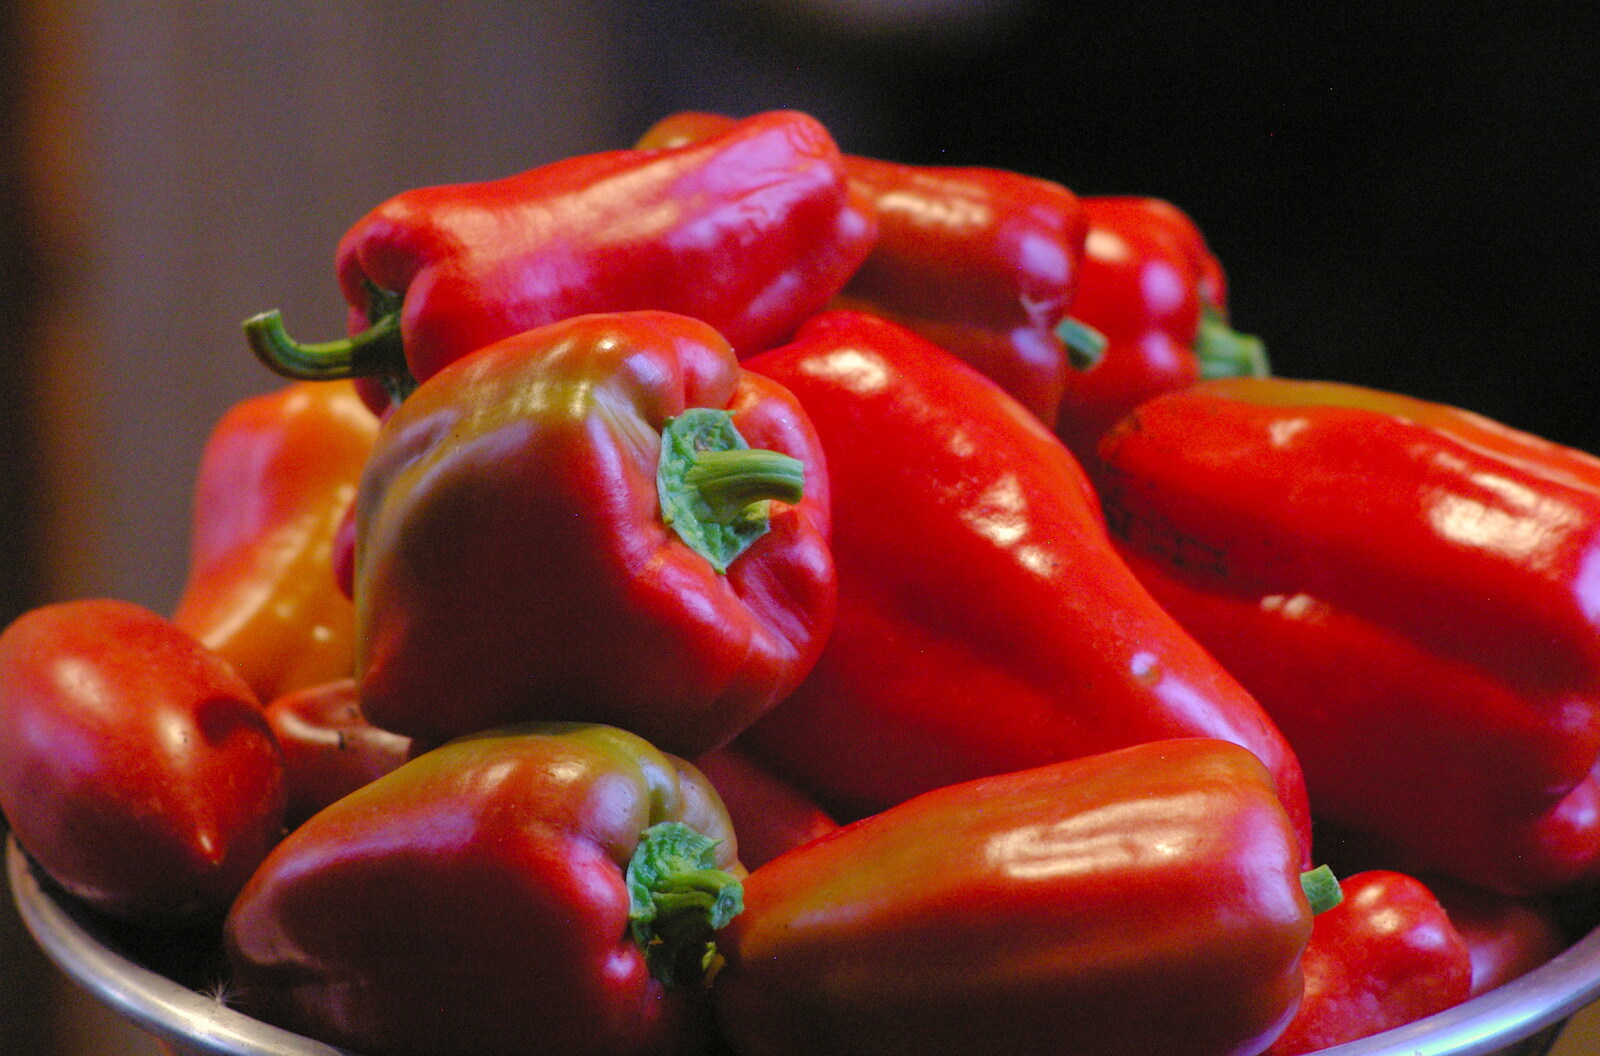 A bowl full of peppers from the greenhouse from Life on the Neonatal Ward, Dairy Farm and Thrandeston Chapel, Suffolk - 26th August 2005